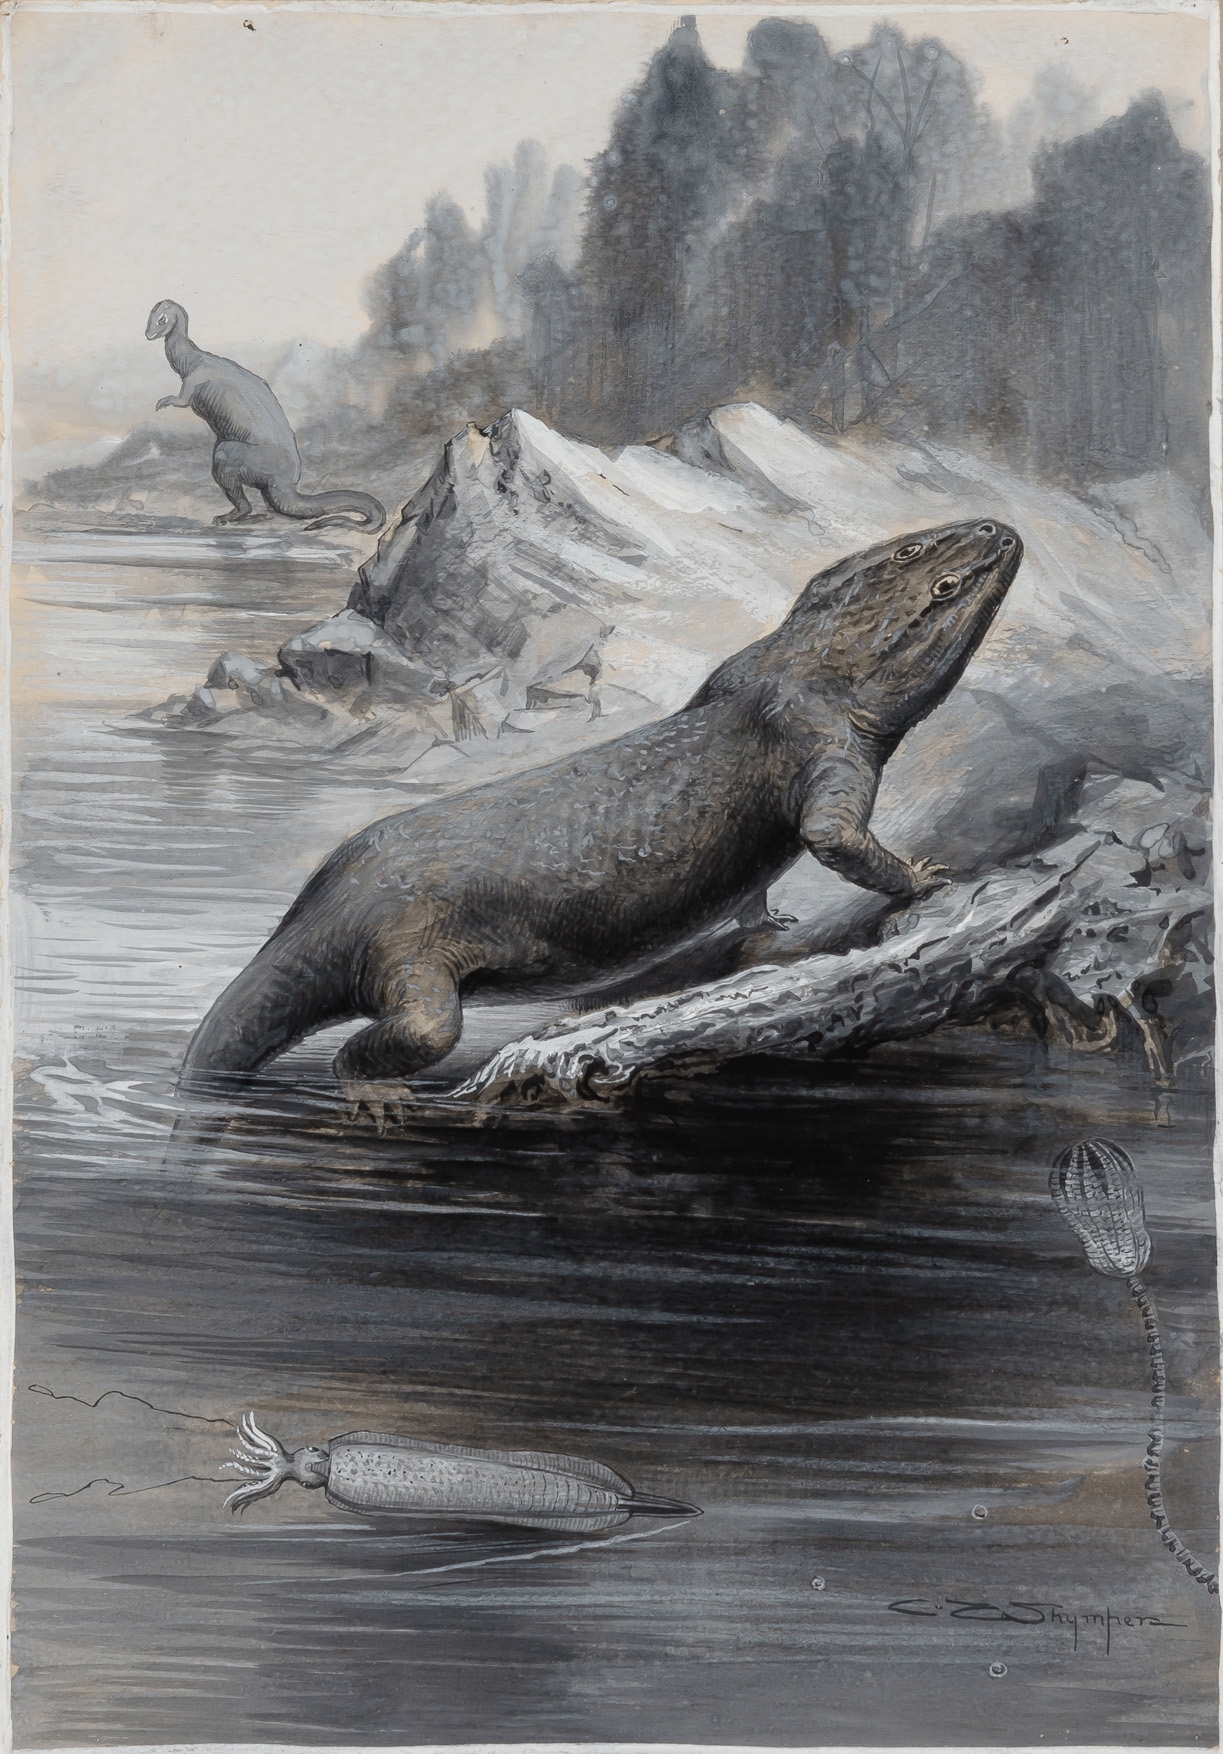 A Triassic Labrynthodont, and Belemnite by Charles Whymper